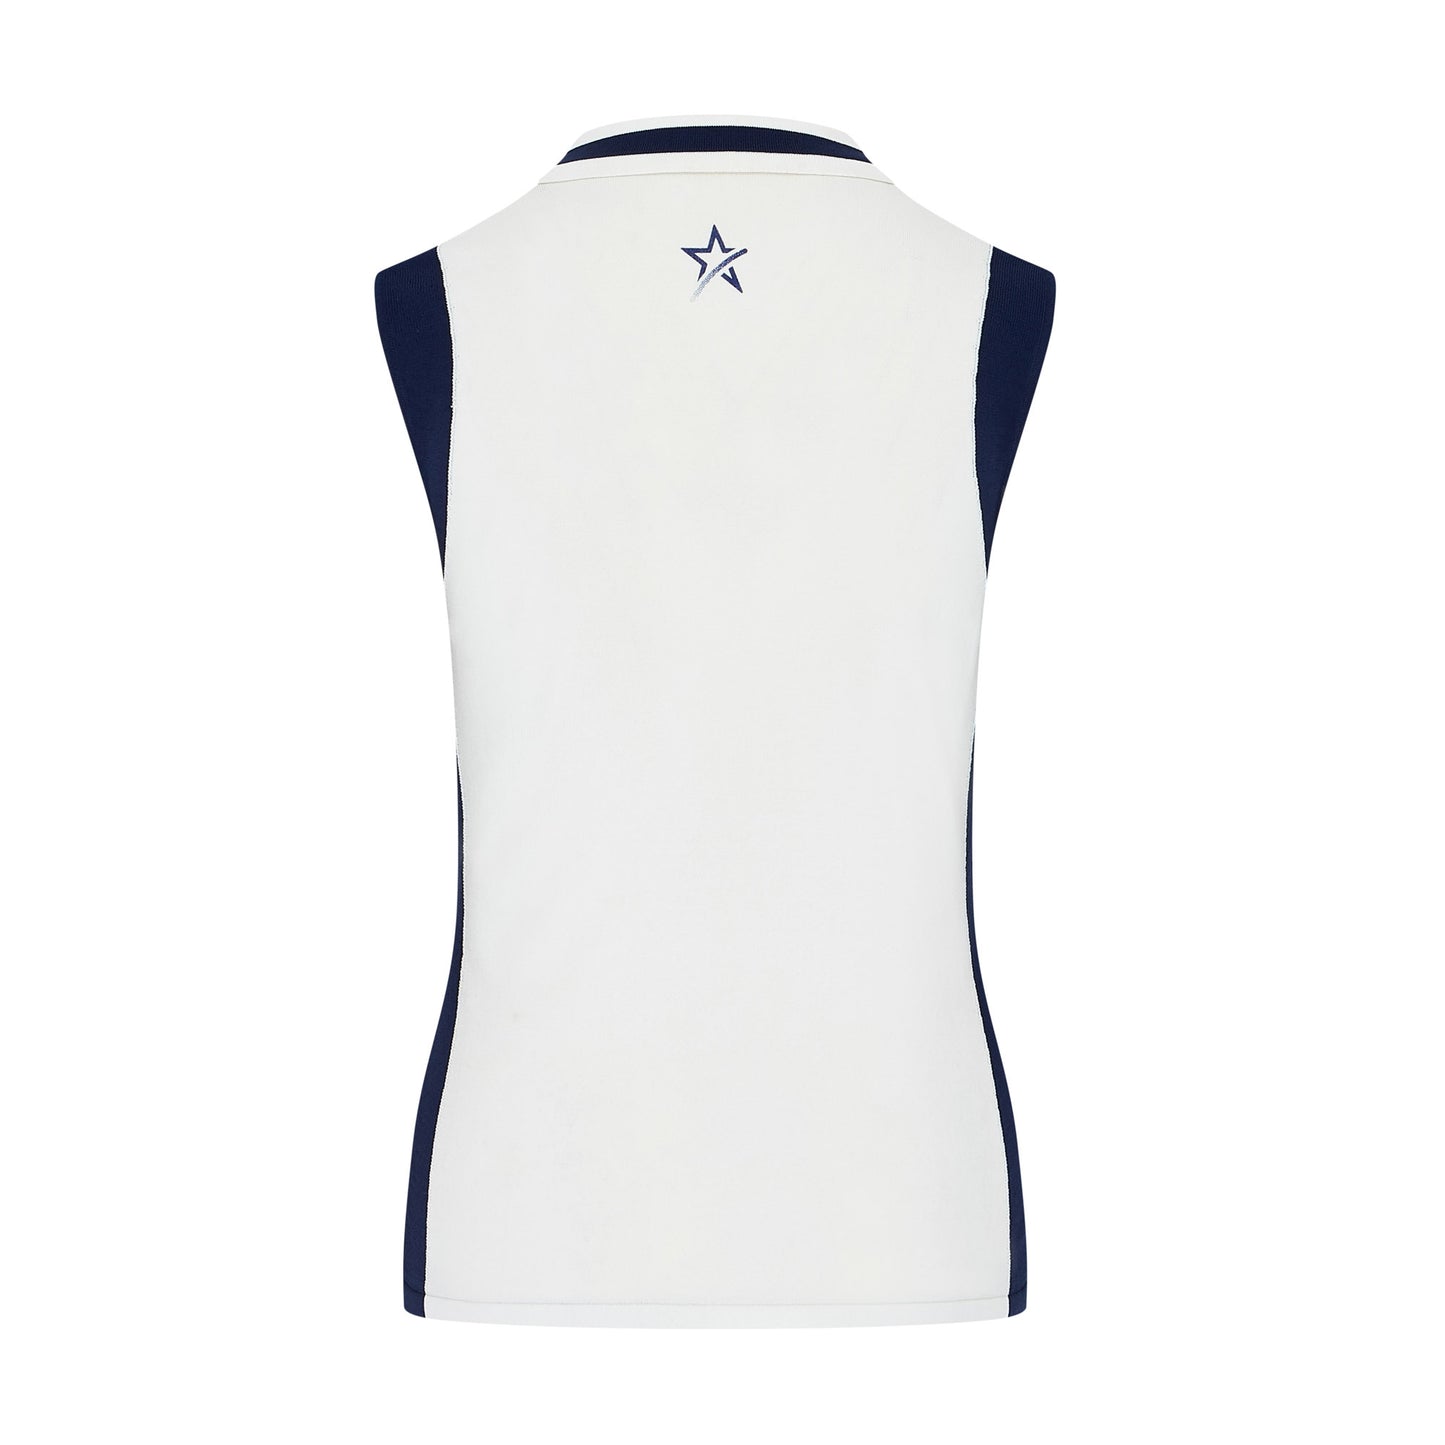 Swing Out Sister Women's ELITE Knitted Sleeveless Polo in Navy and White